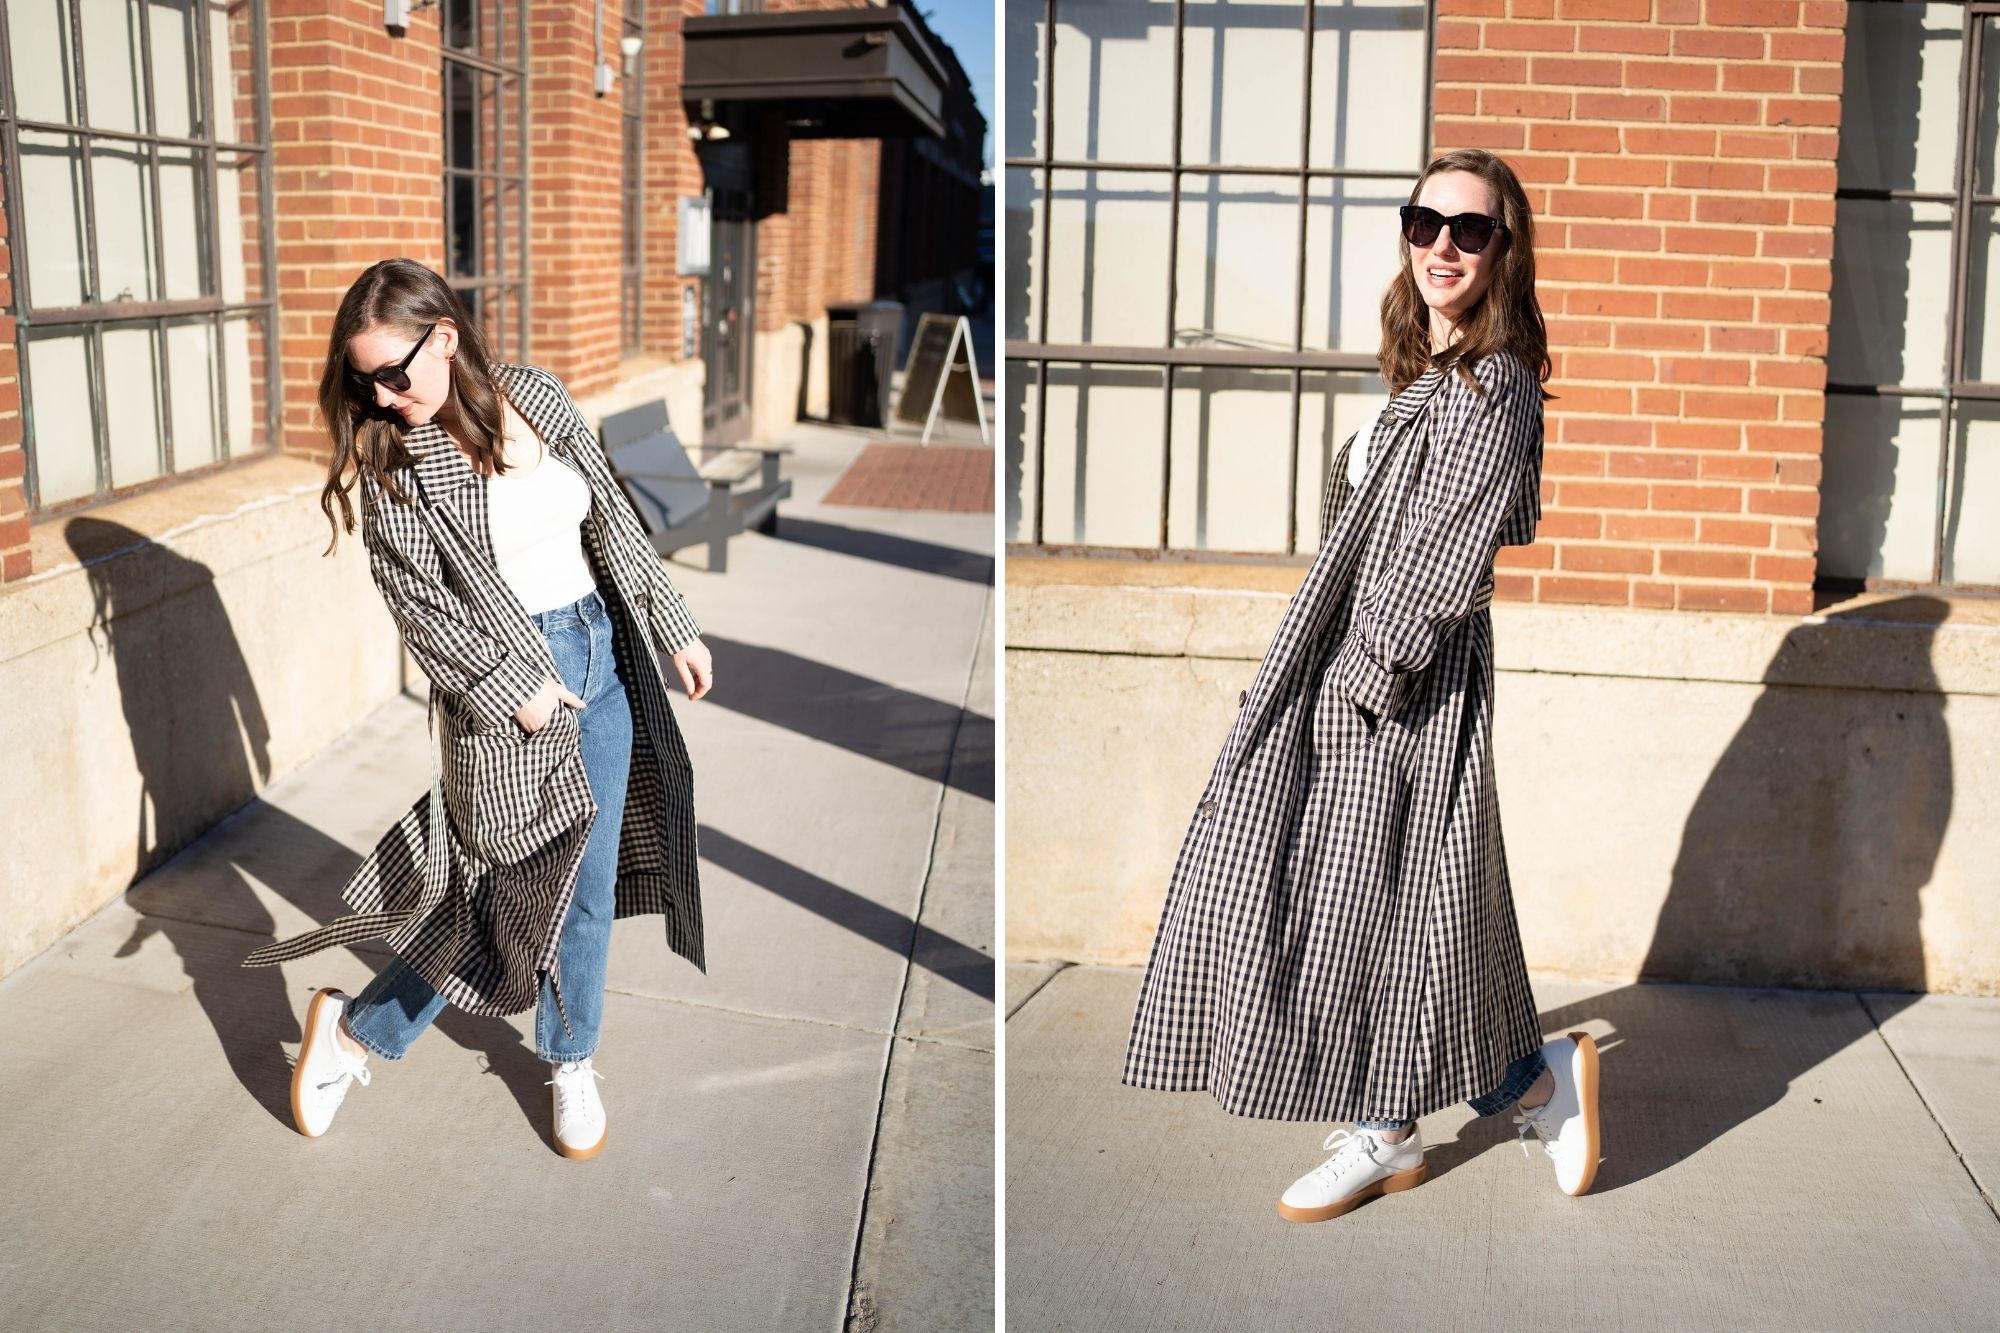 Alyssa wears a cream tank, blue jeans, gingham trench, and white sneakers